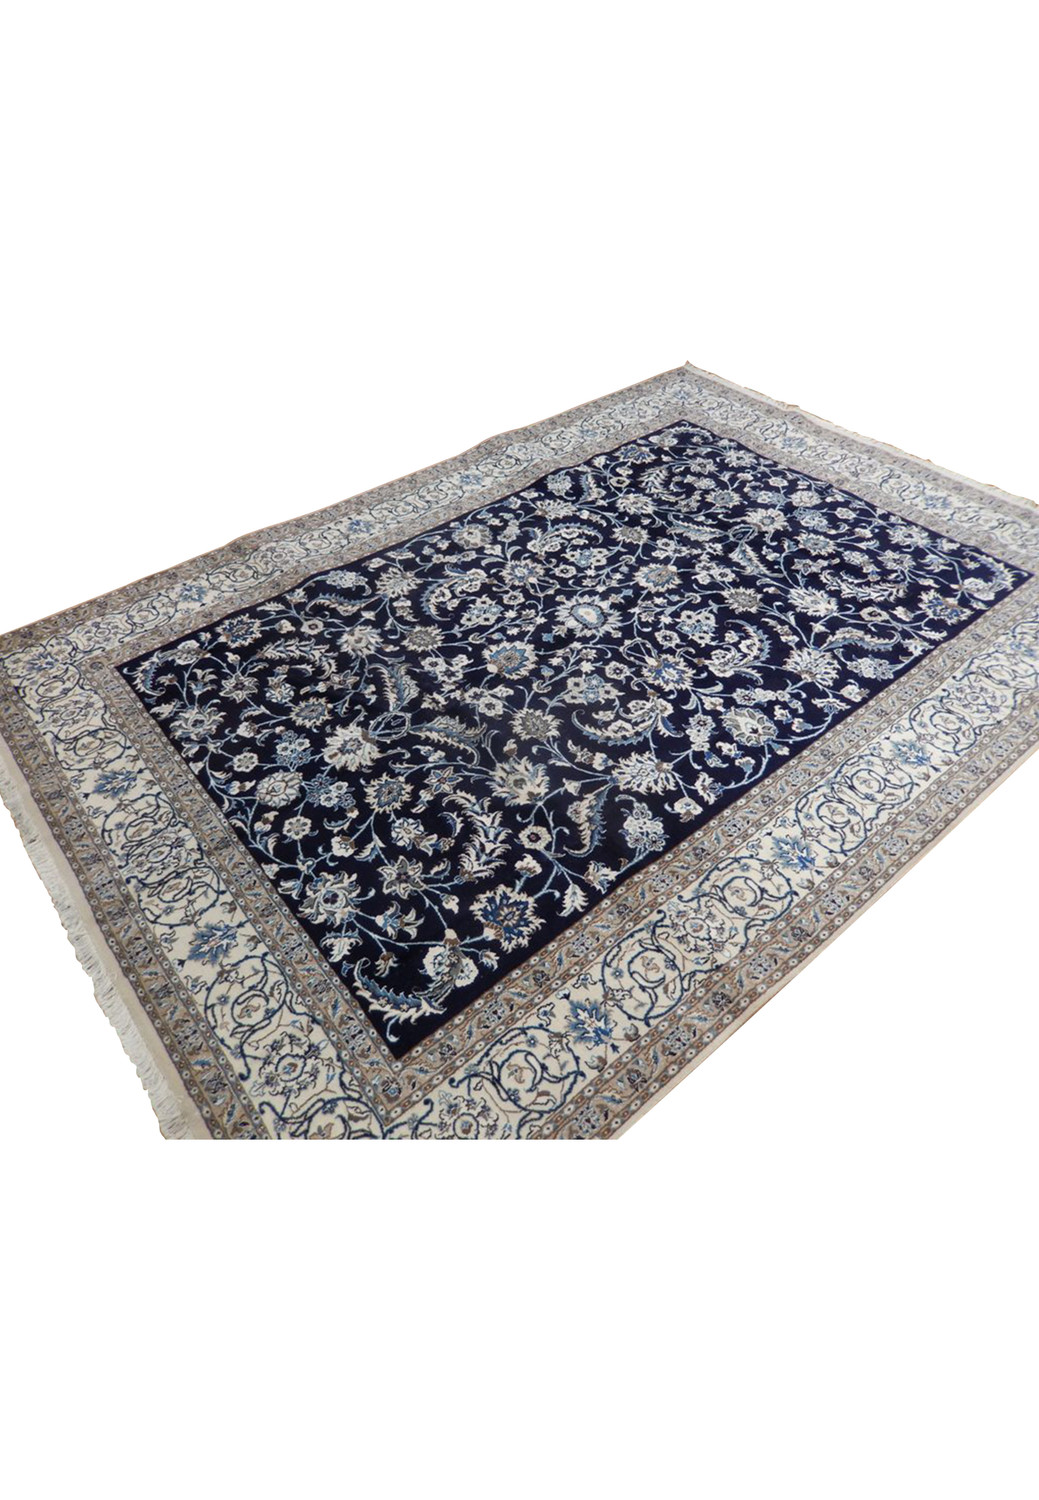 A corner angle view of the Persian Nain Rug, emphasizing the elaborate border patterns against the deep blue background